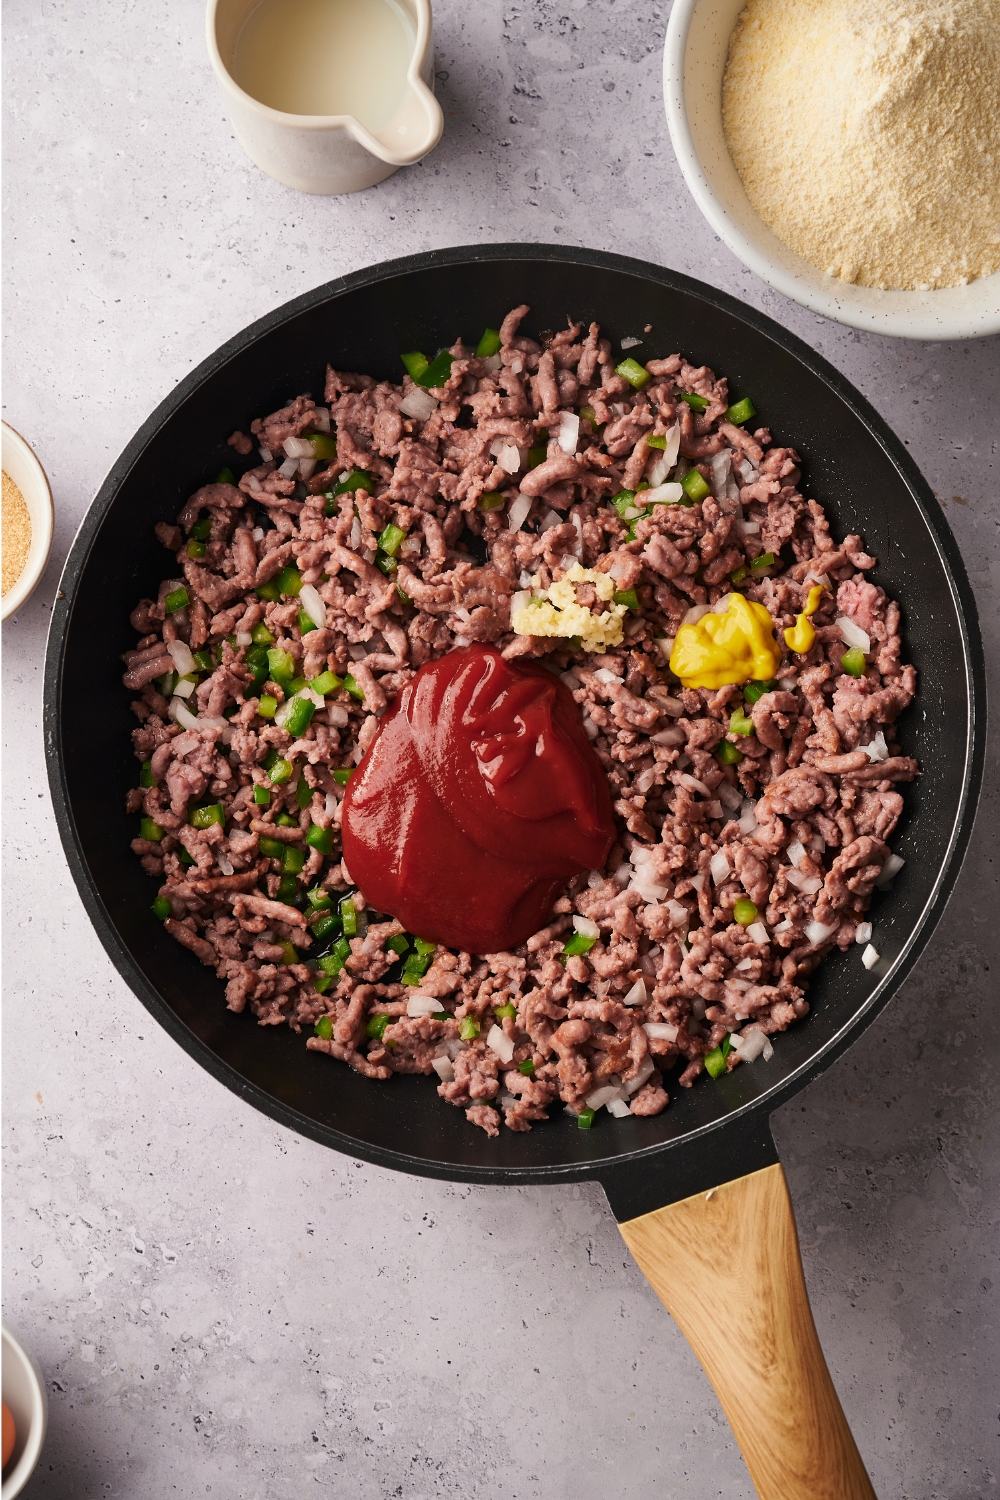 A skillet filled with cooked ground beef, green peppers, onion, minced garlic, yellow mustard, and ketchup.